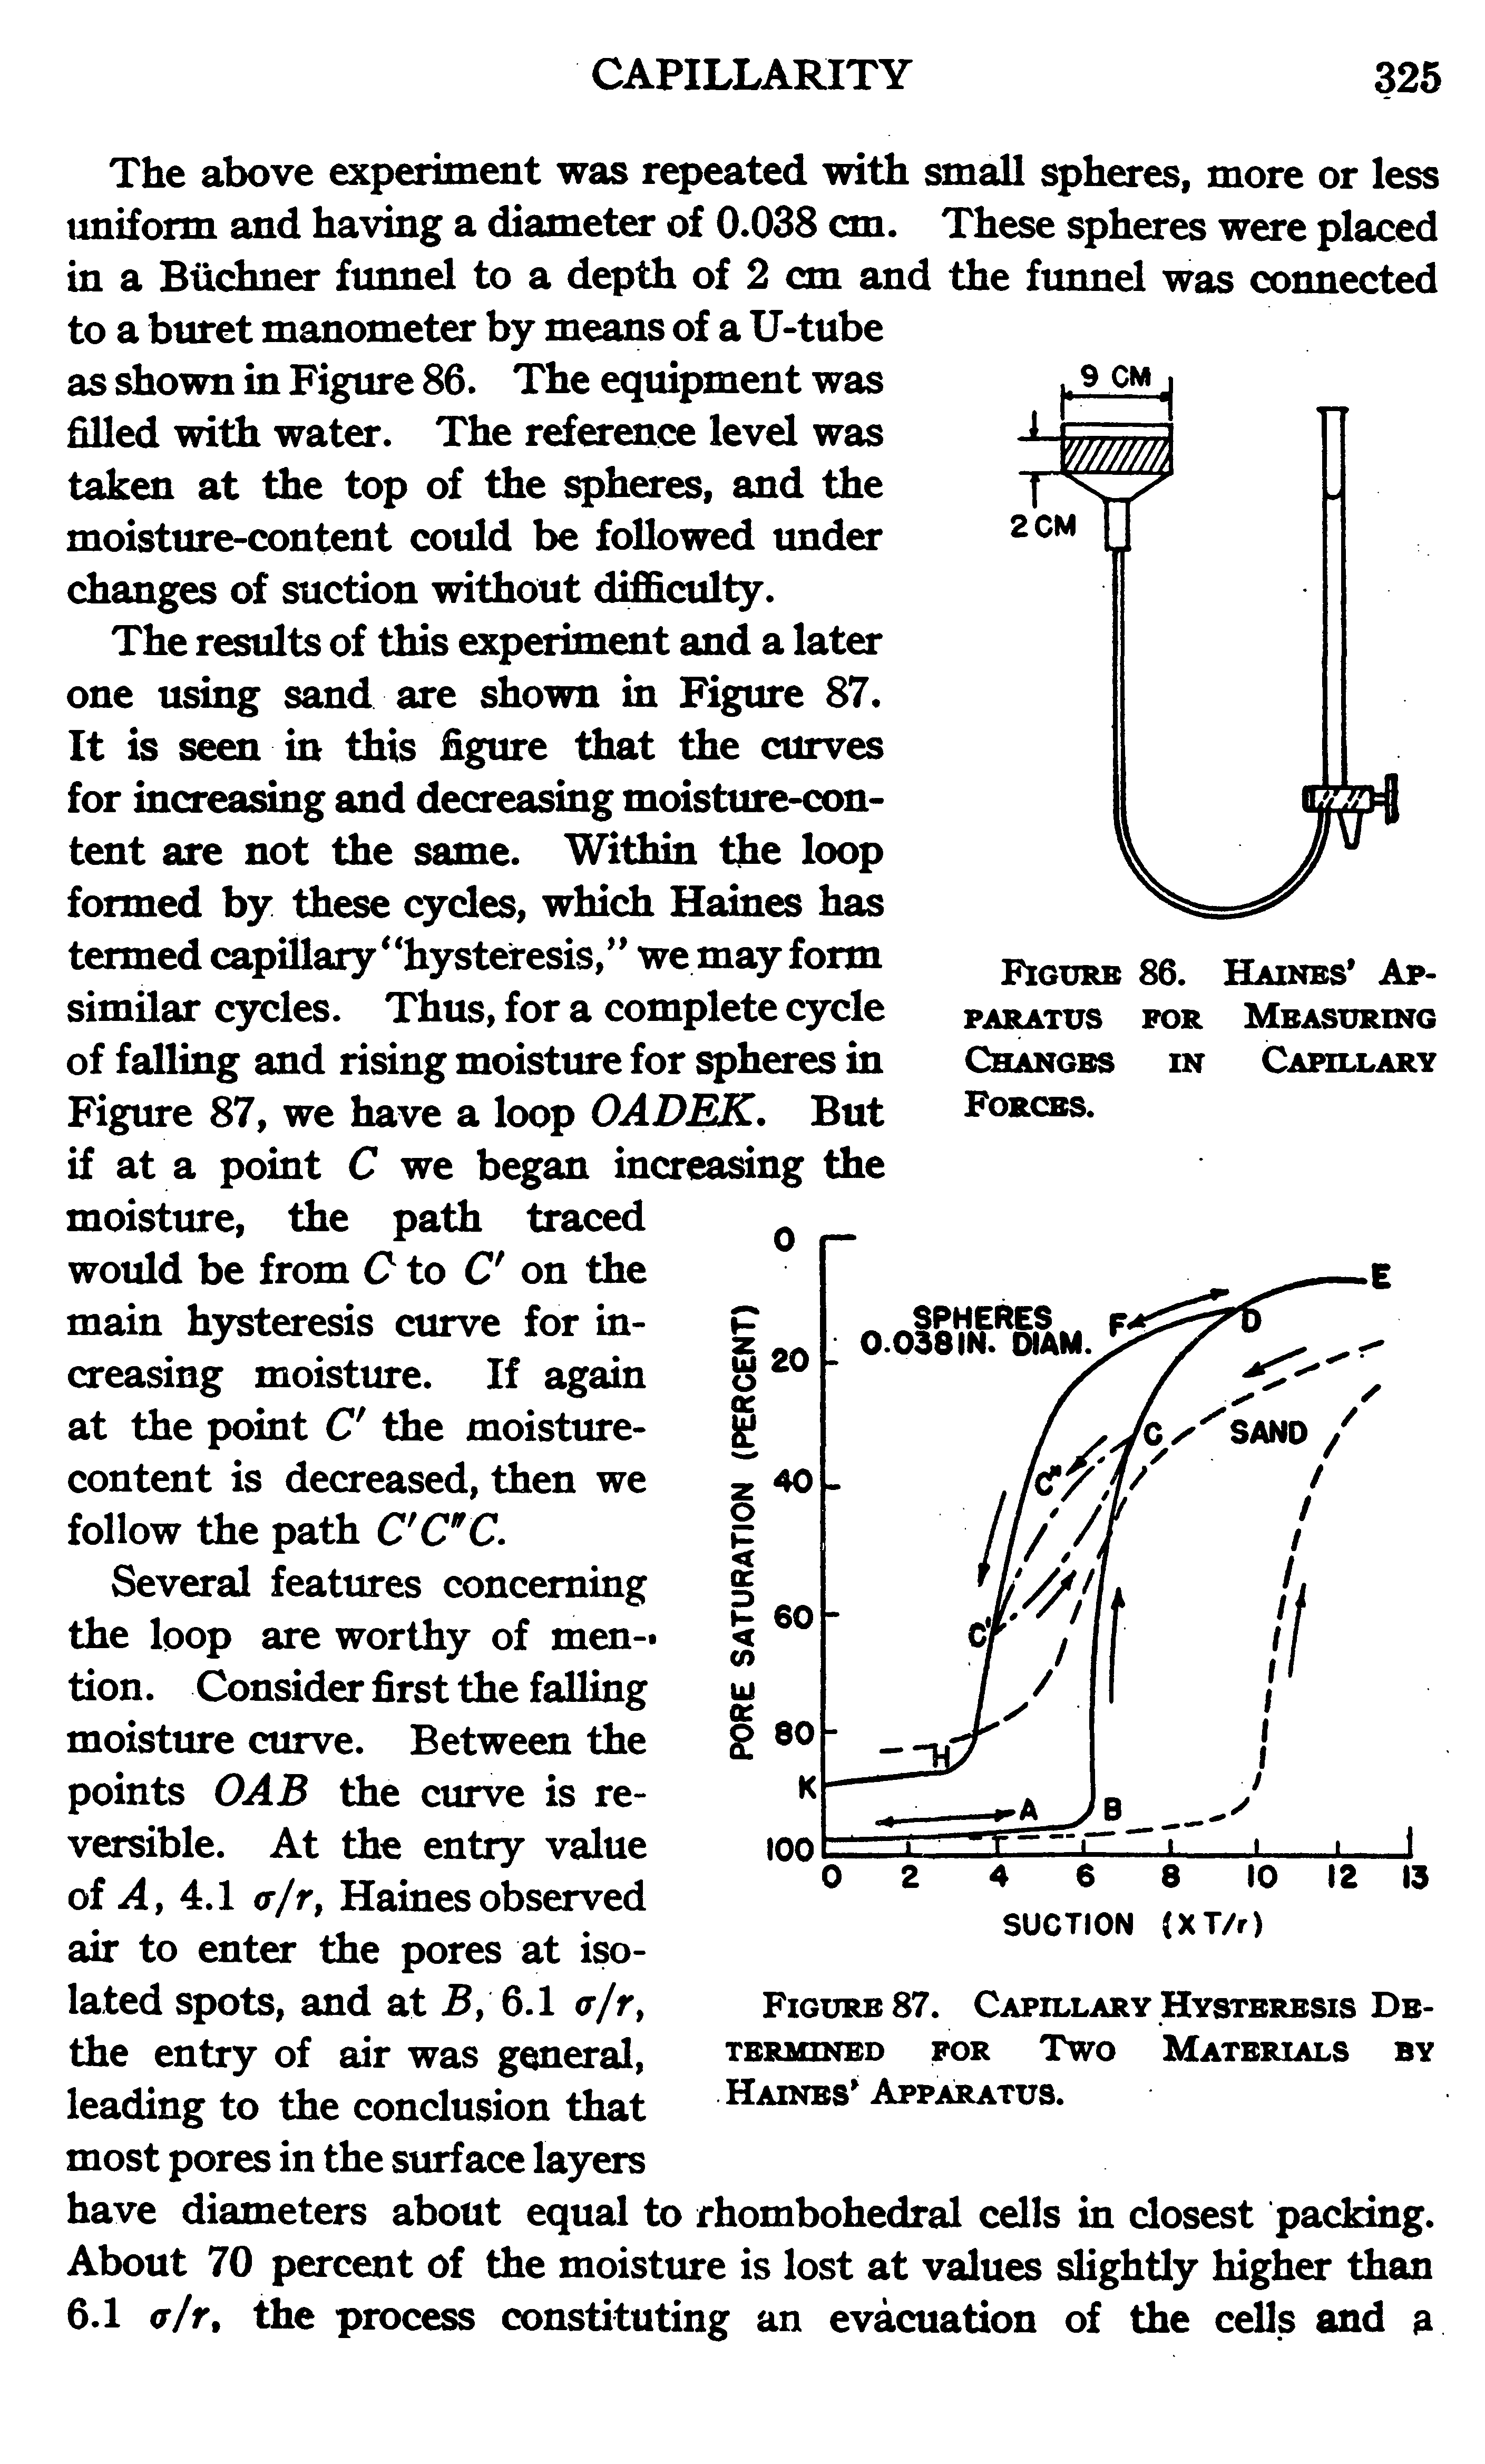 Figure 87. Capillary Hysteresis Determined for Two Materials by Haines Apparatus.